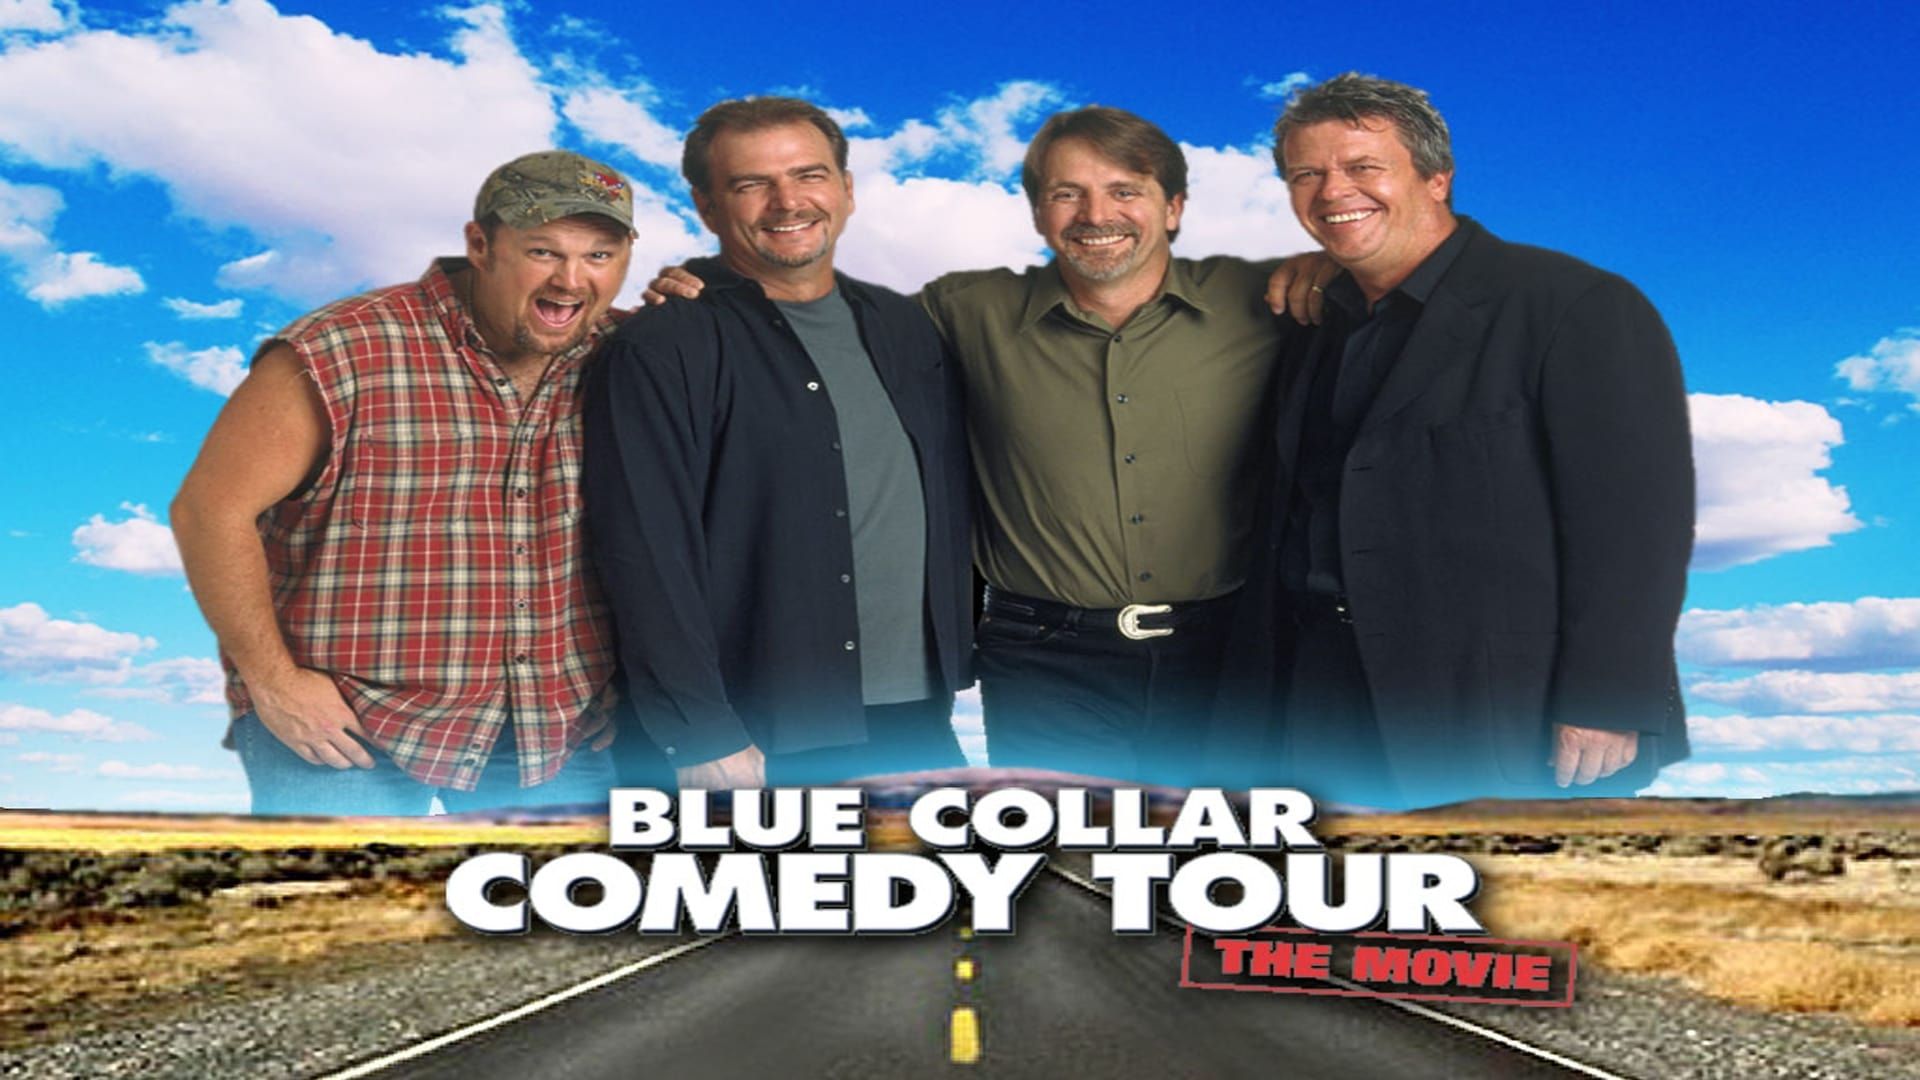 Blue Collar Comedy Tour: The Movie background